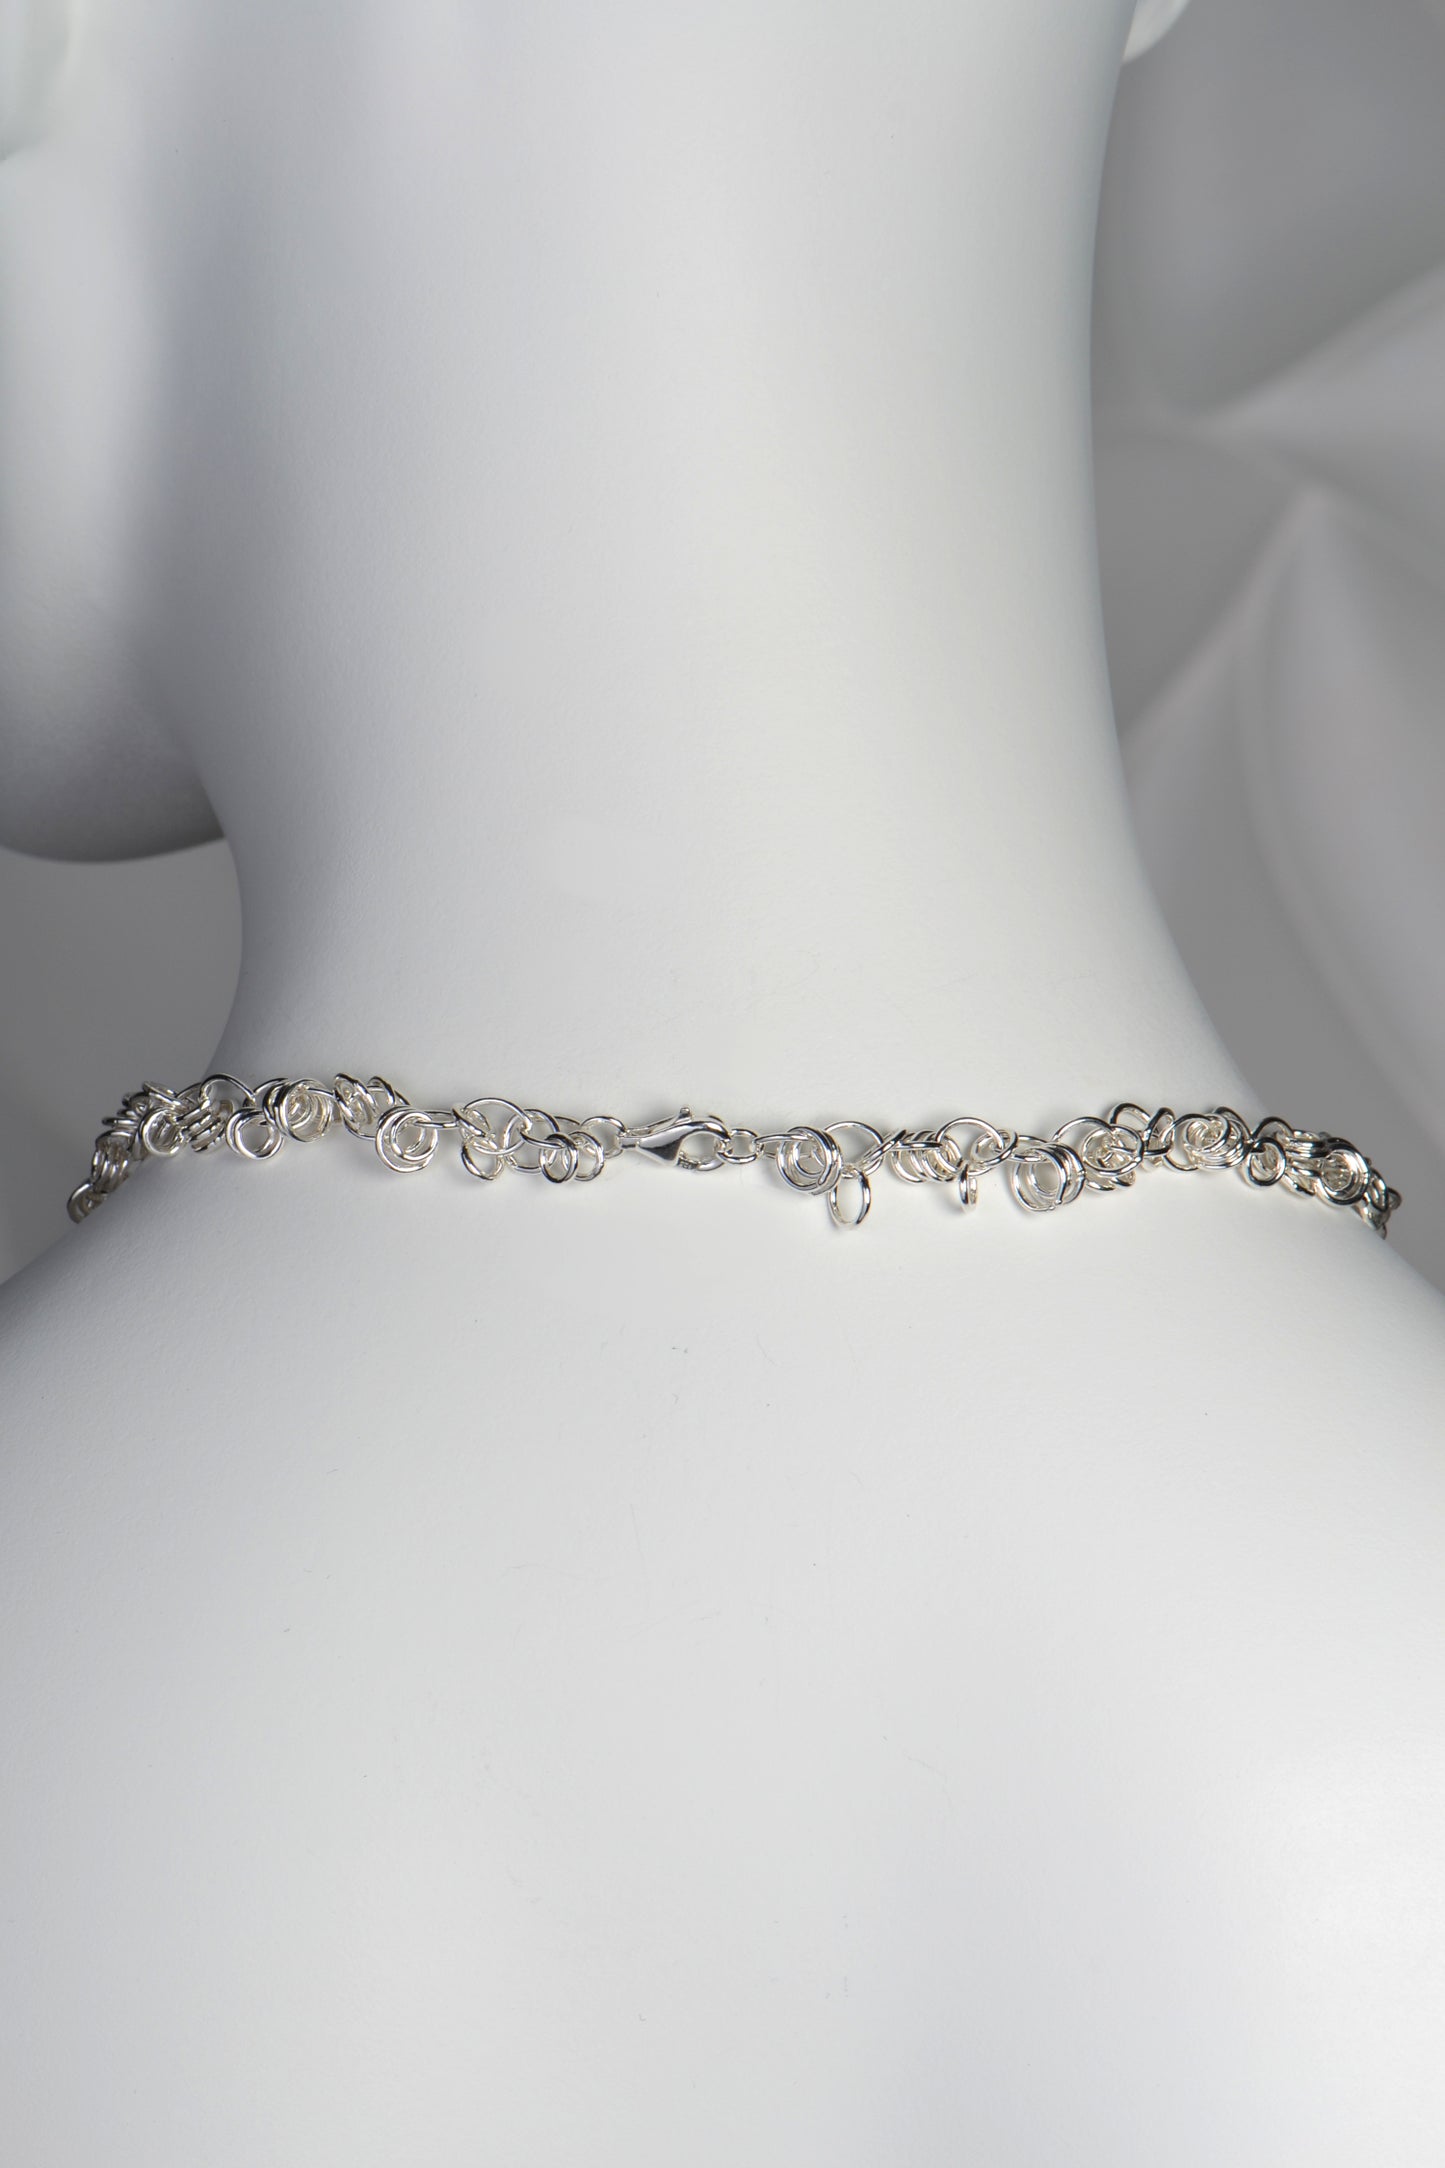 back of the chain link necklace showing the silver shackle clasp